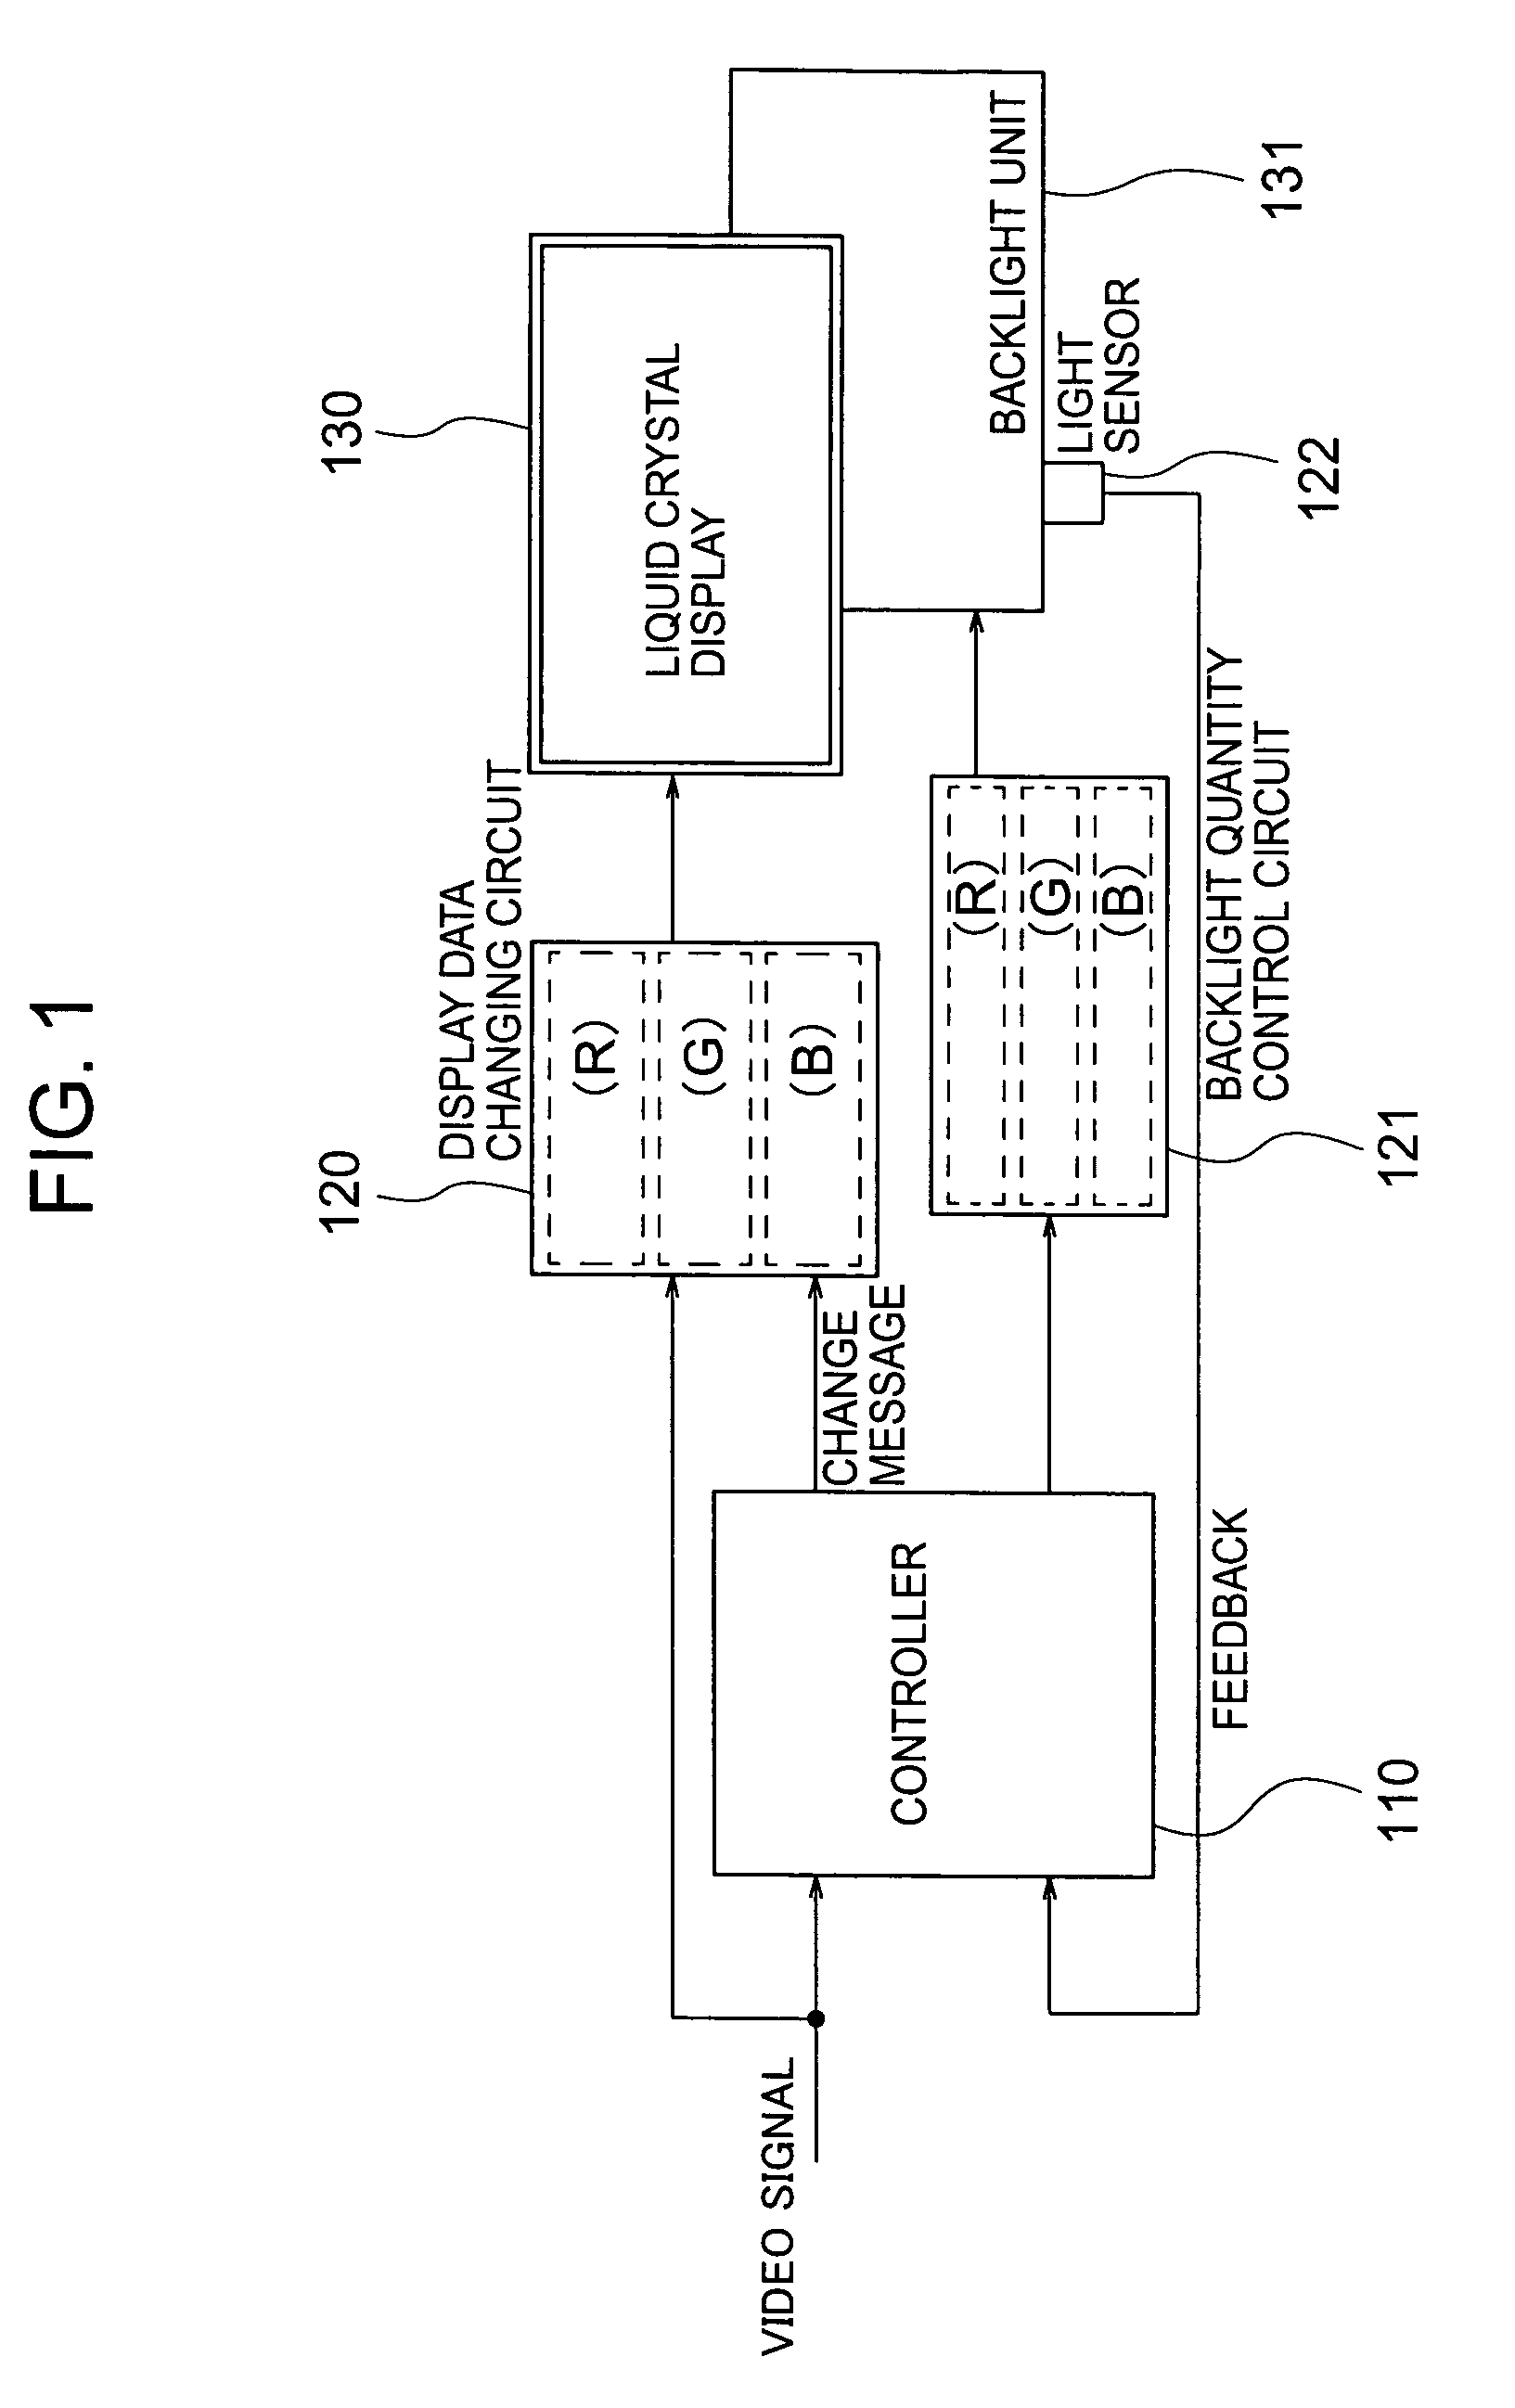 Liquid crystal display apparatus with control of LCD and backlight corresponding to an image